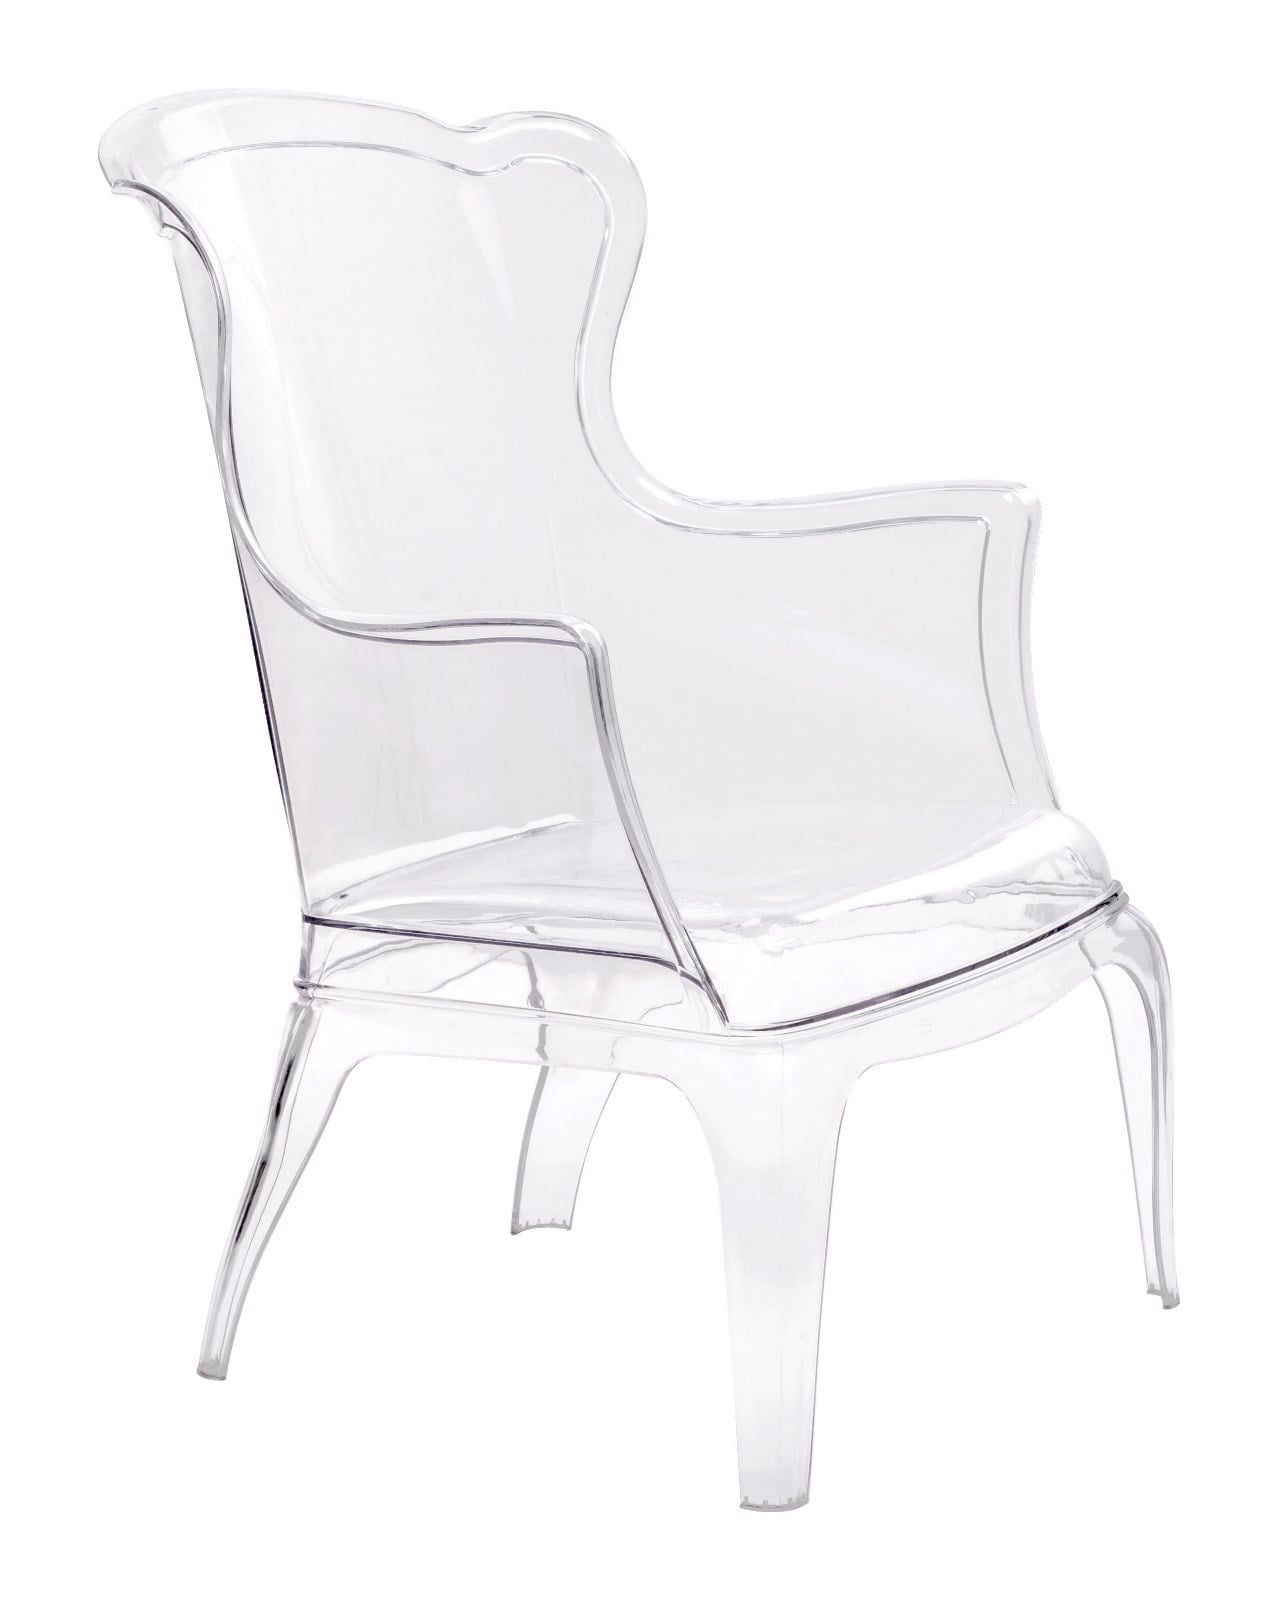 Modern Outdoor Chair, Clear Plastic